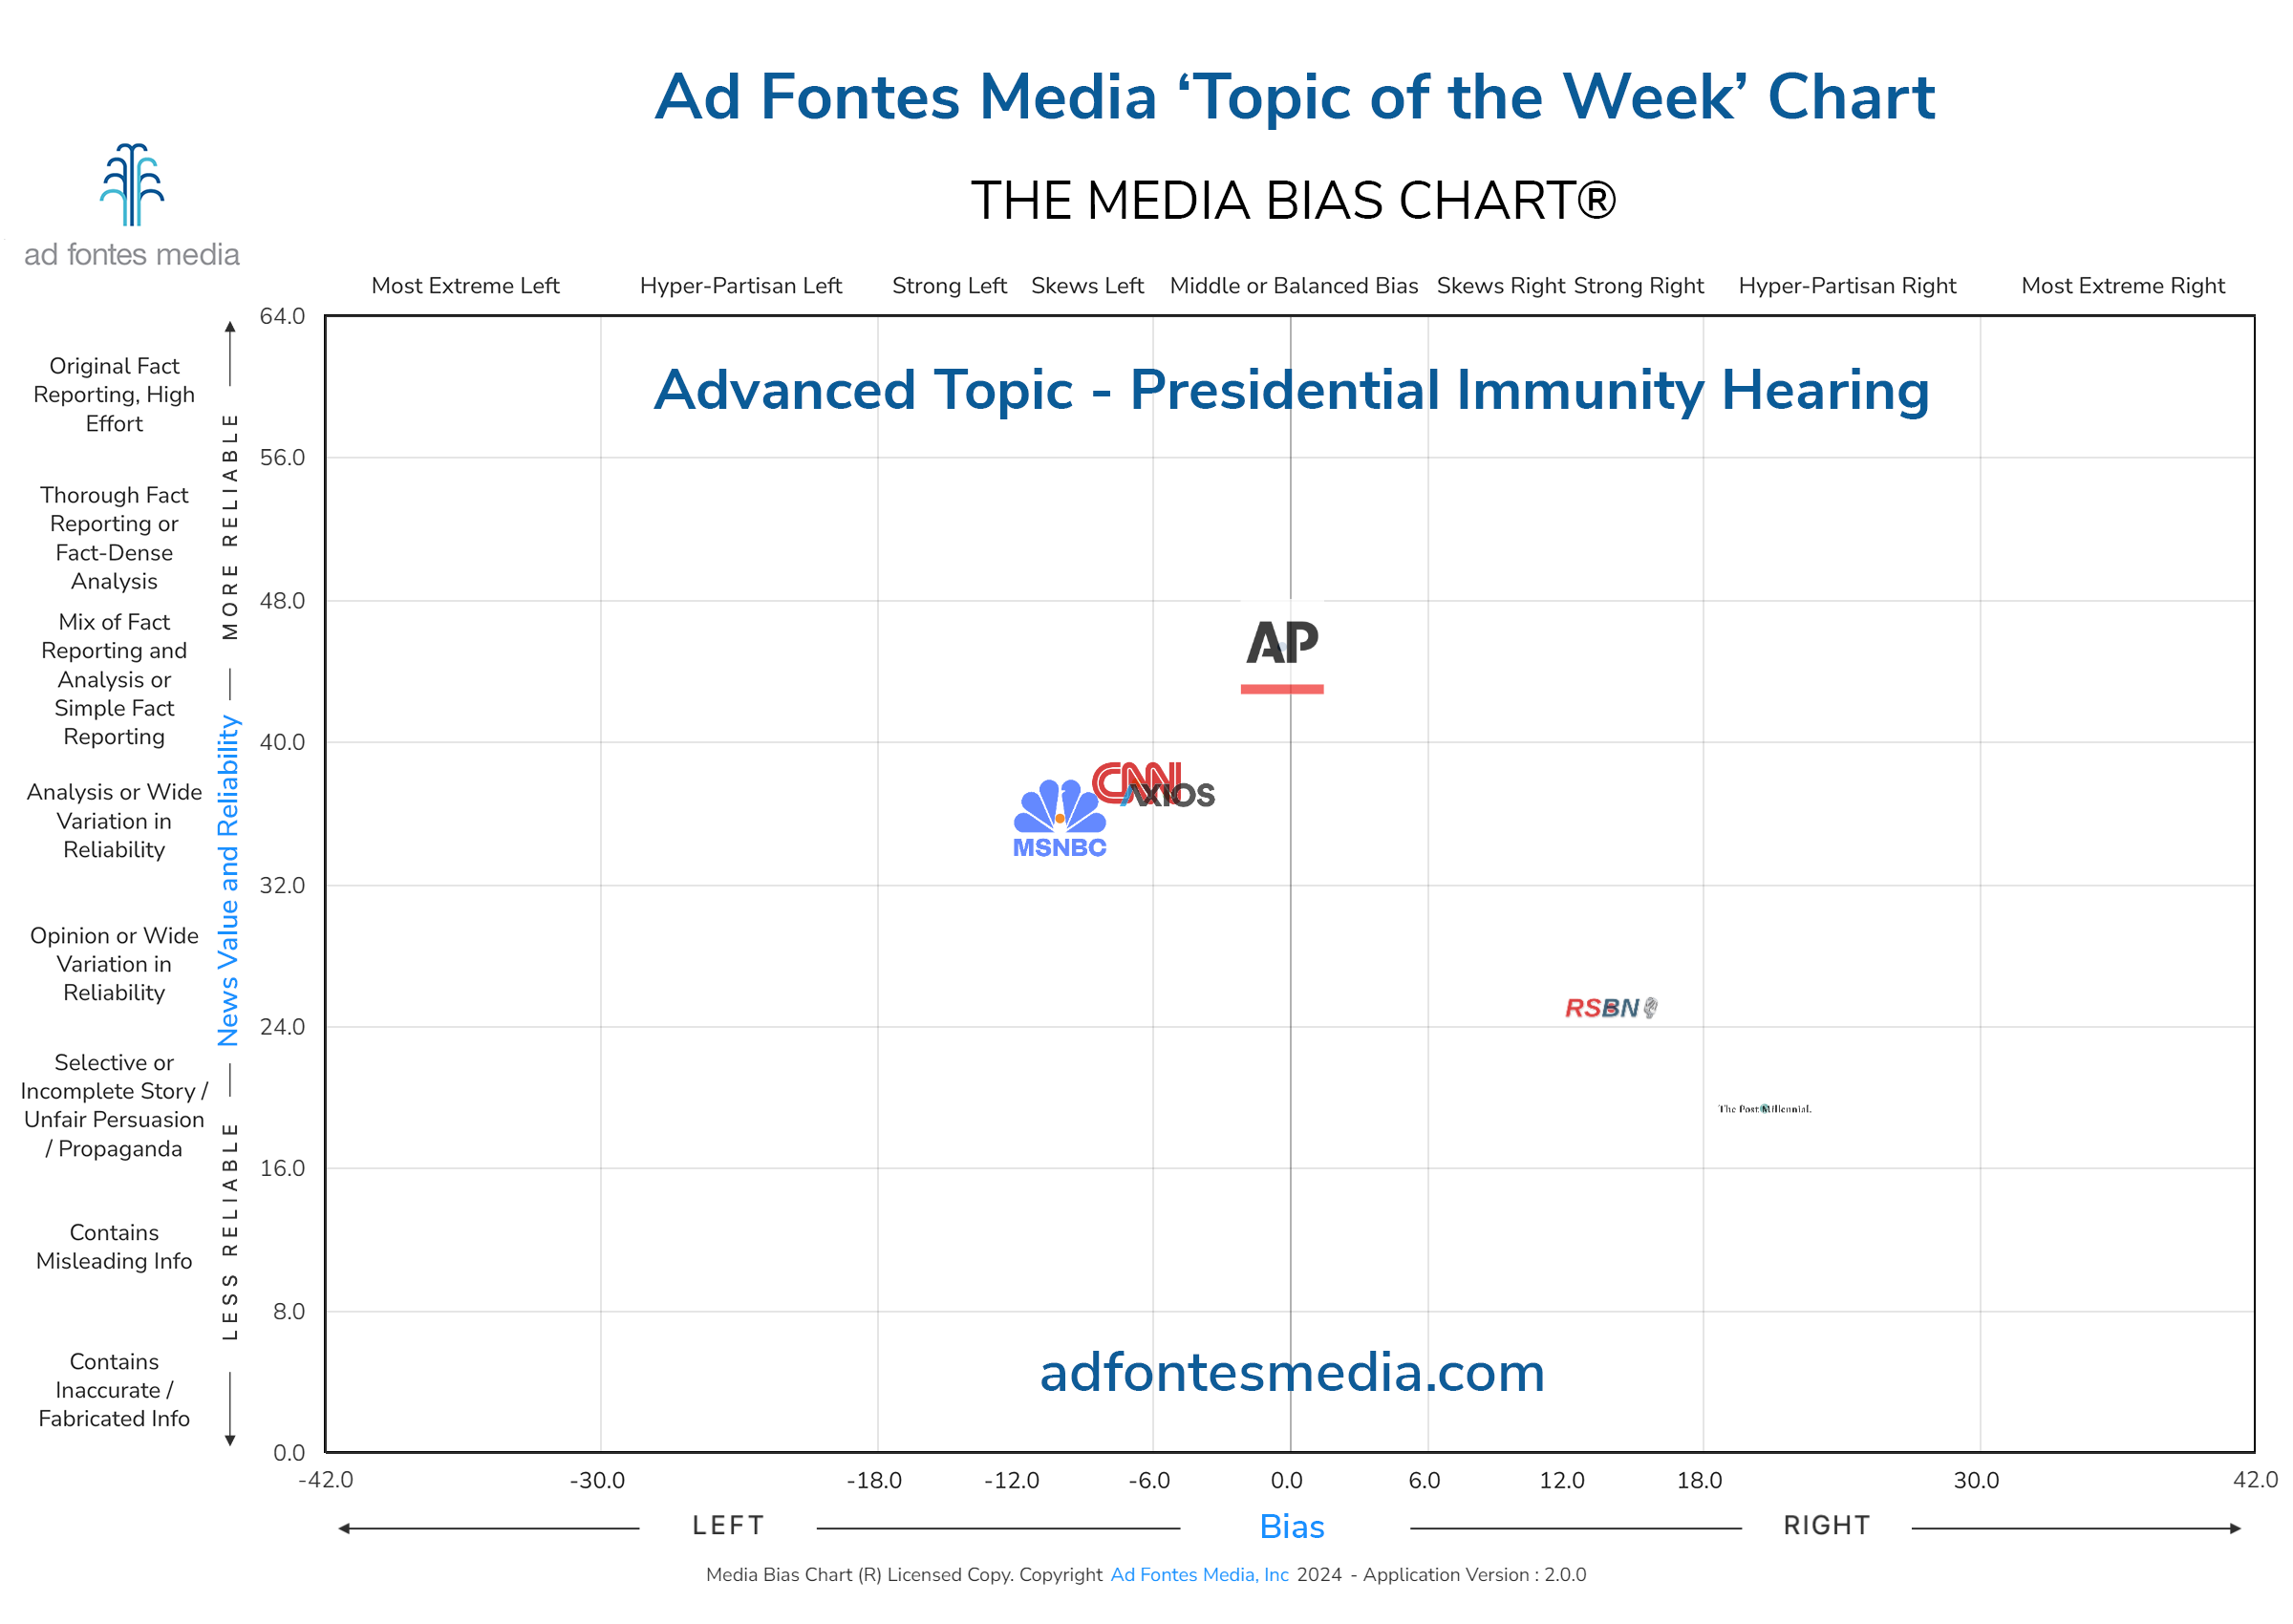 Scores of the Presidential Immunity Hearing articles on the chart